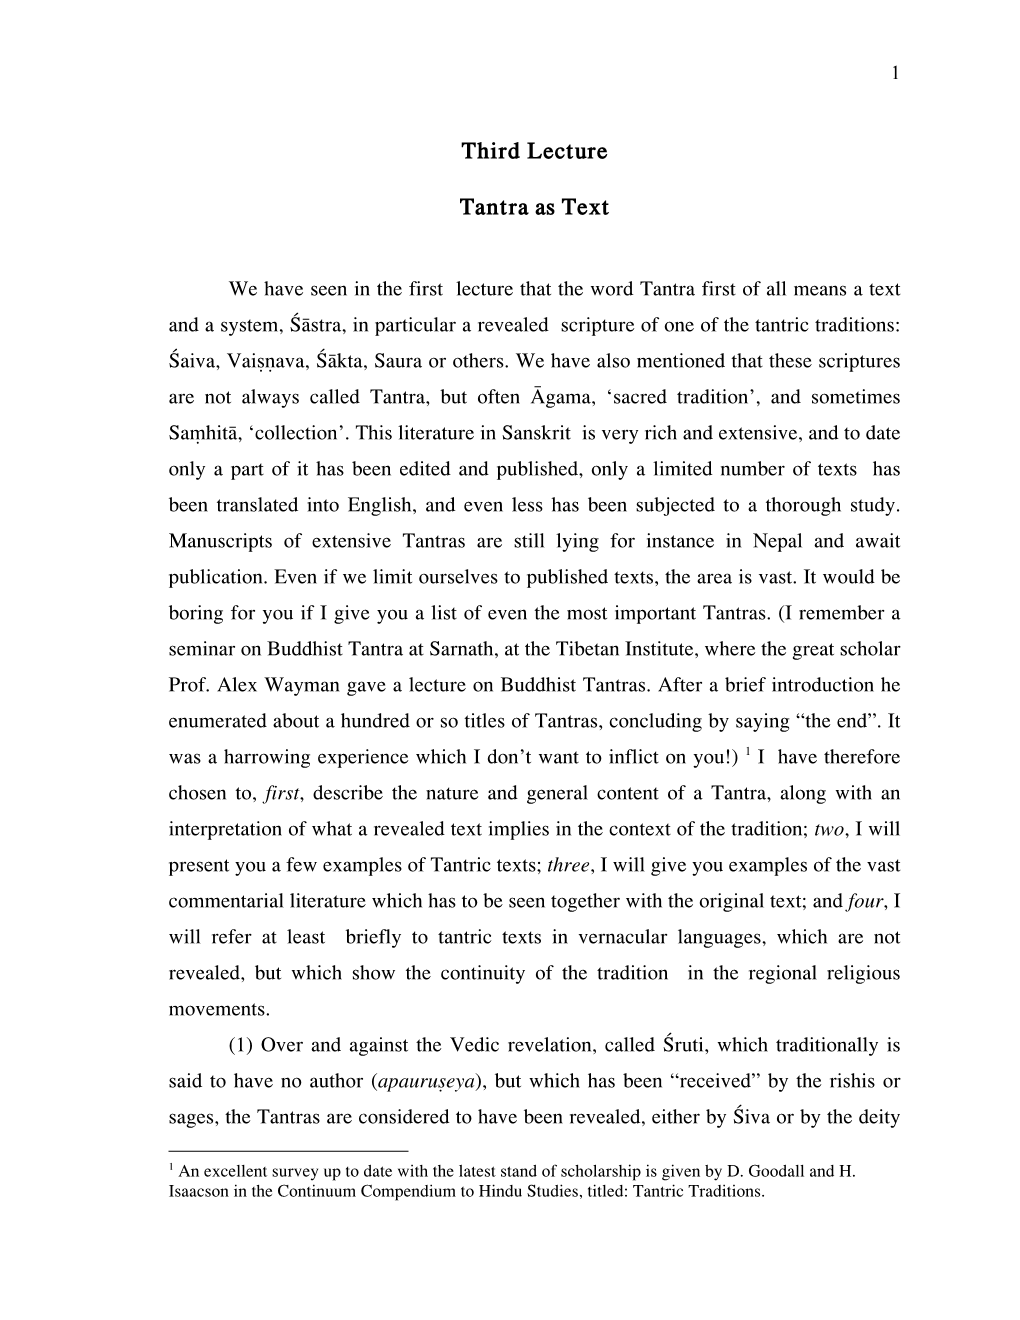 Third Lecture Tantra As Text